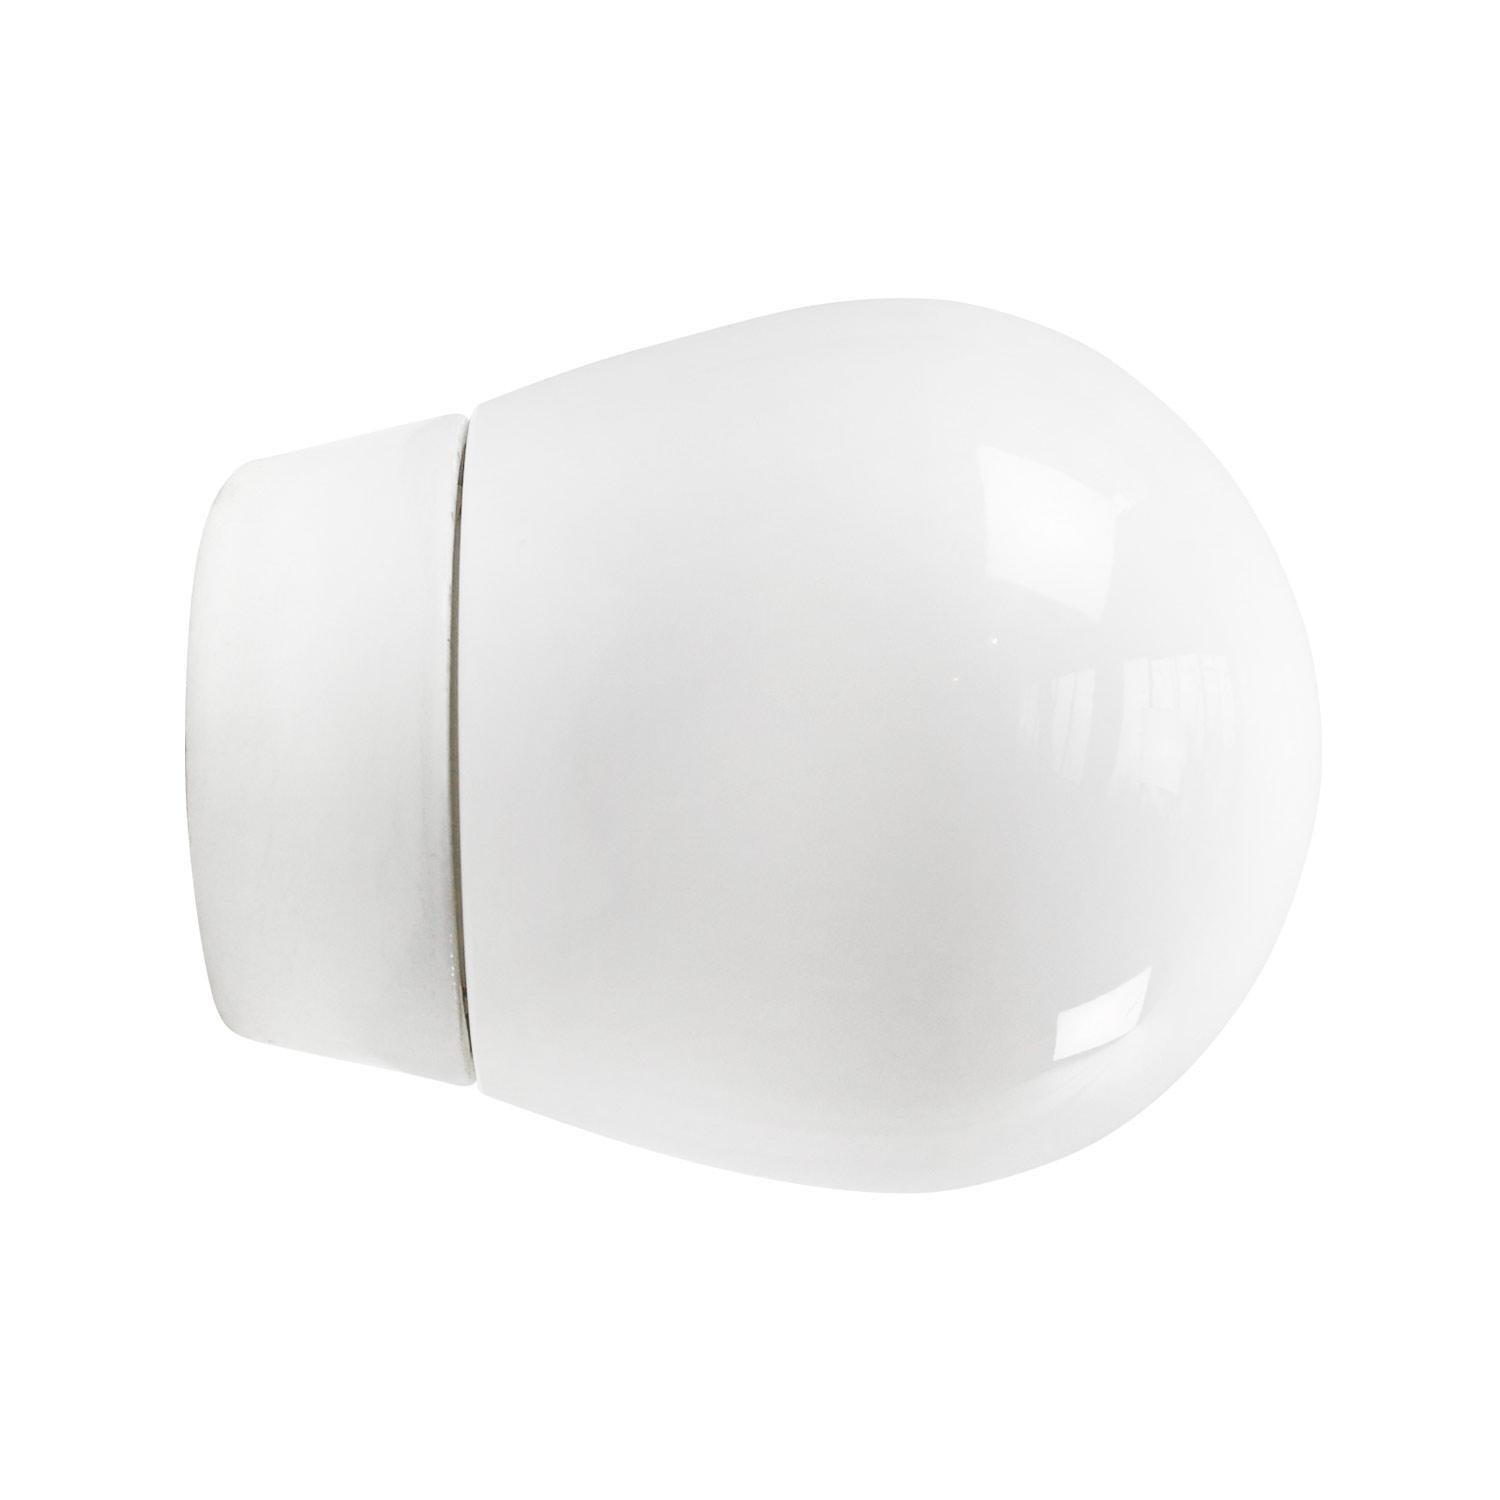 Porcelain wall lamp / scone by Lindner no. 6000
Designed by Wilhelm Wagenfeld
White porcelain, white opaline glass.

2 conductors, no ground.
Measures: Diameter foot 85 mm
Suitable for 110 volt USA
New wiring is UL listed (110 volt) or CE